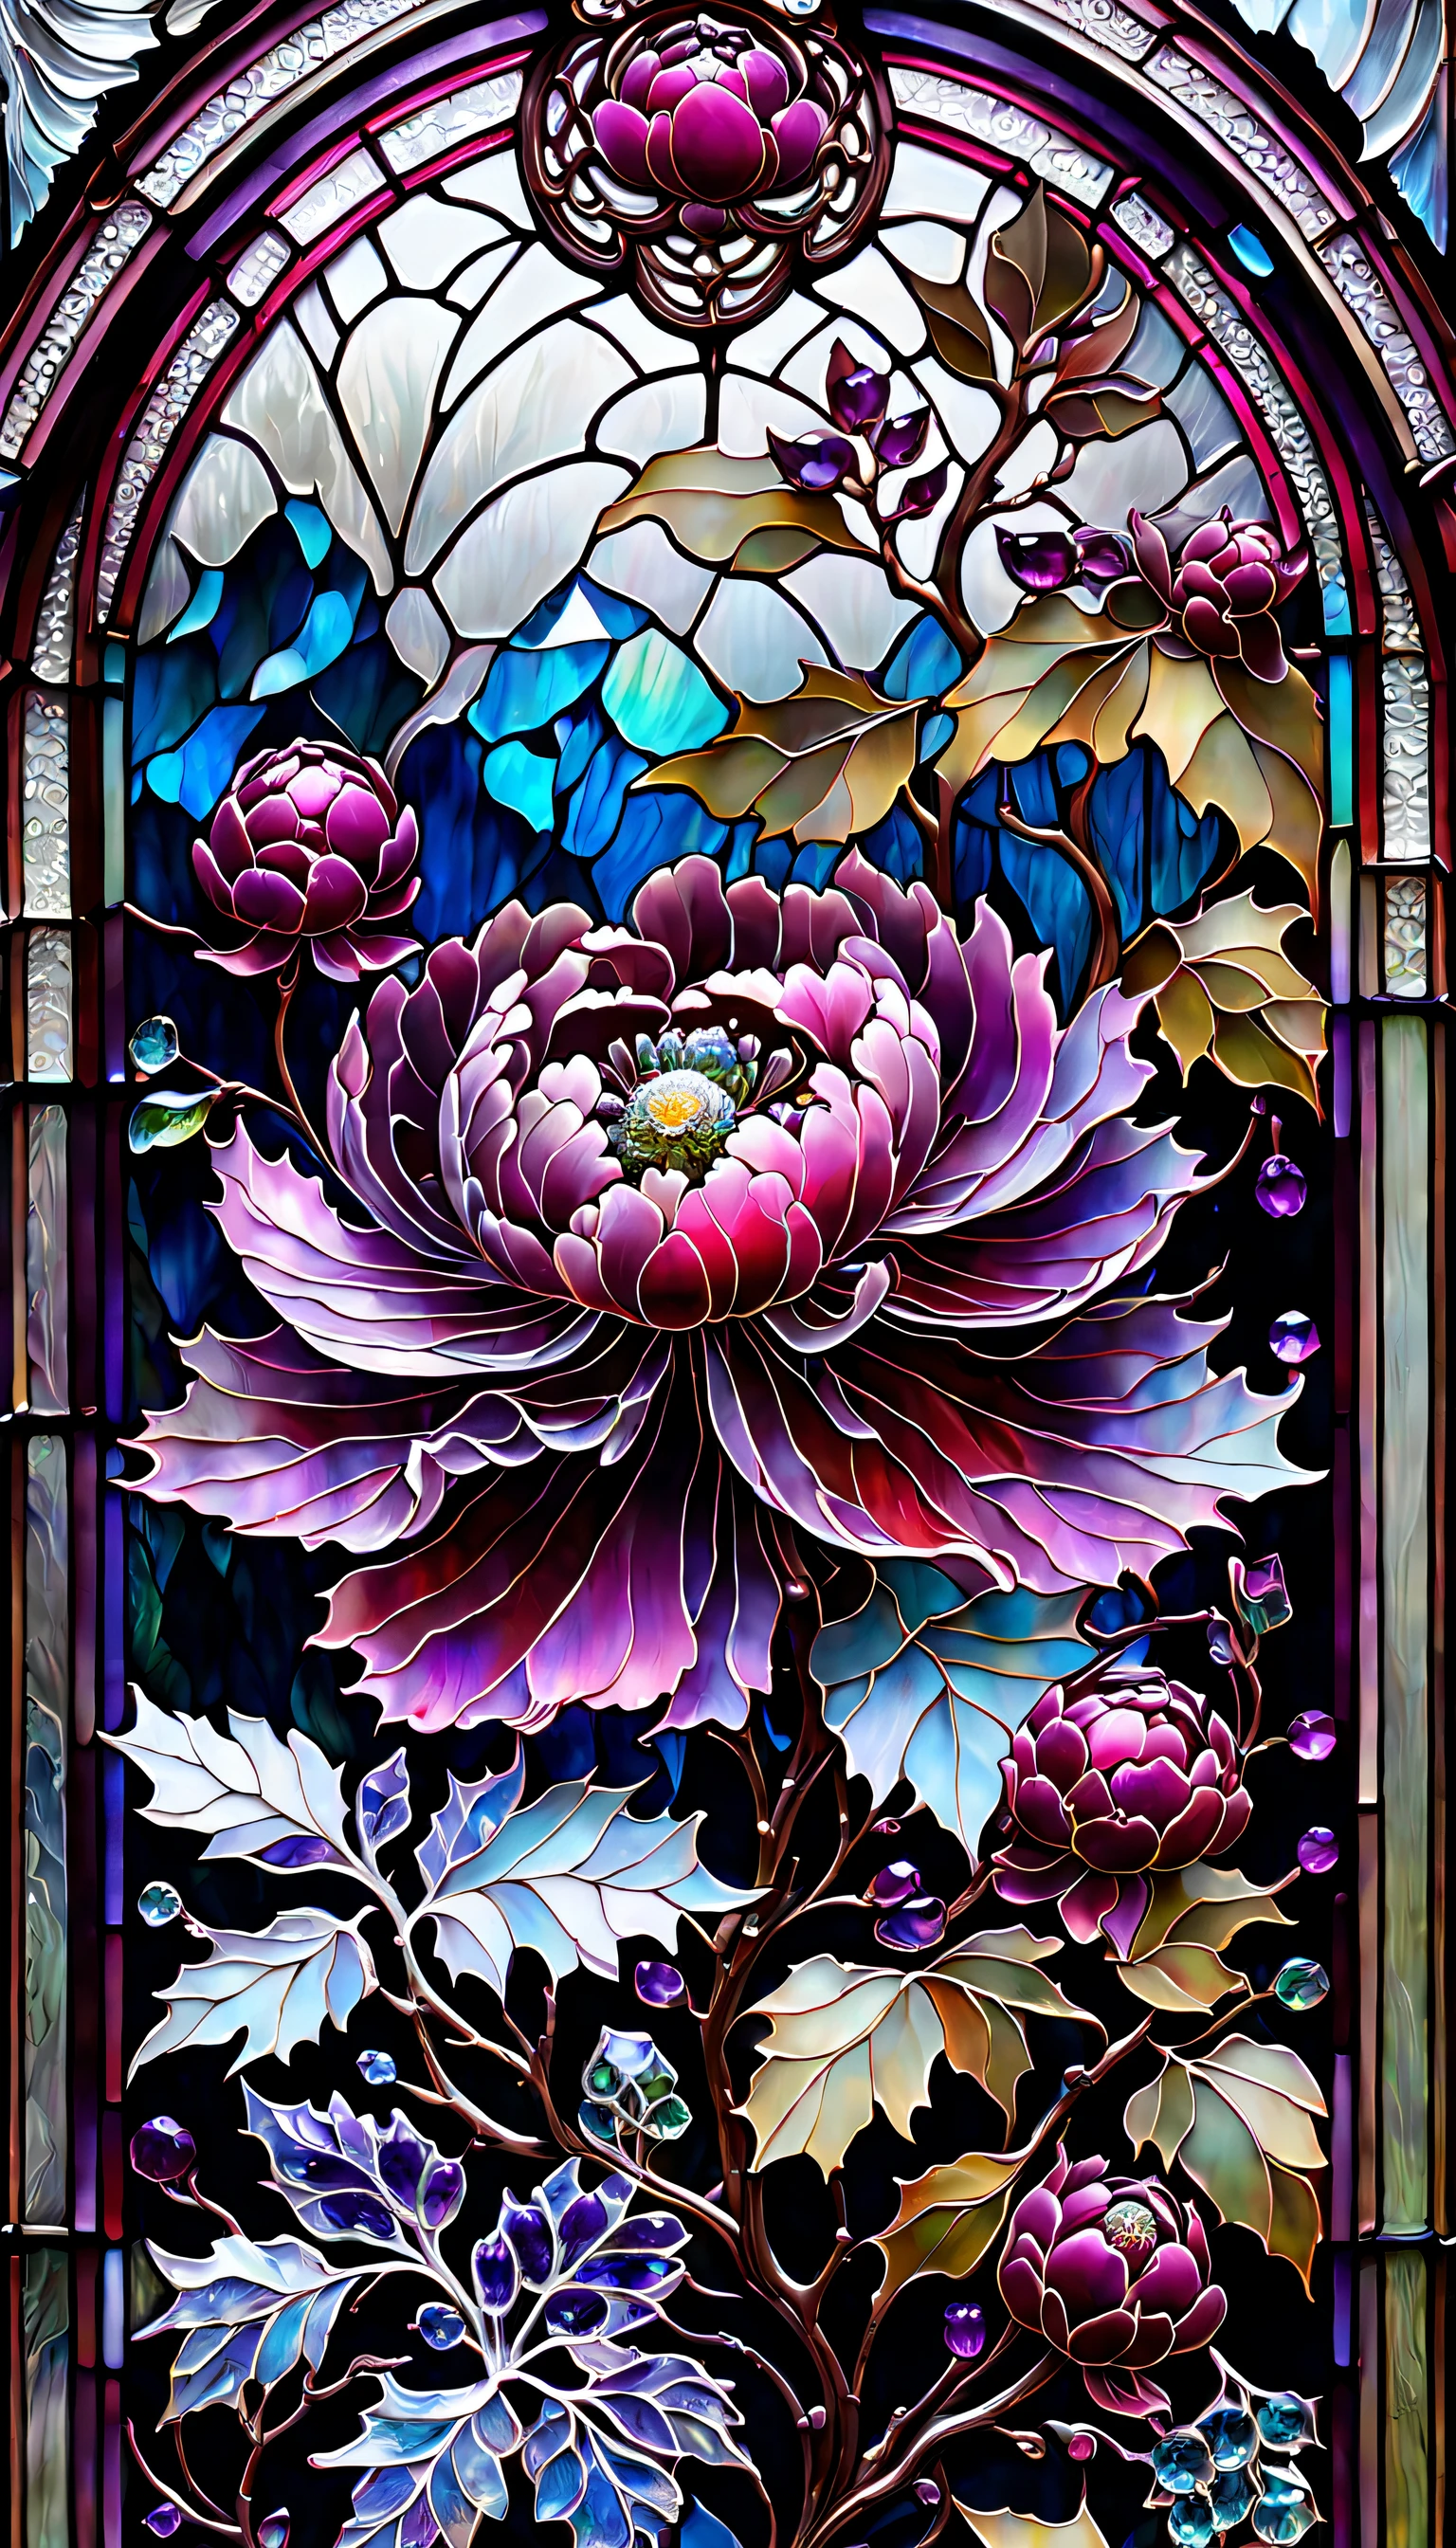 triadic colors, cinematic, transparent glass japanese garden, ruby peony flowers, ice hoarfrost, baroque, Craola, highly detailed stained glass, amethyst crystals, labradorite iridescent crystals, Andy Kehoe, John Blanche, complex highly detailed background, fantasy, filigree, filigree detailed, intricated